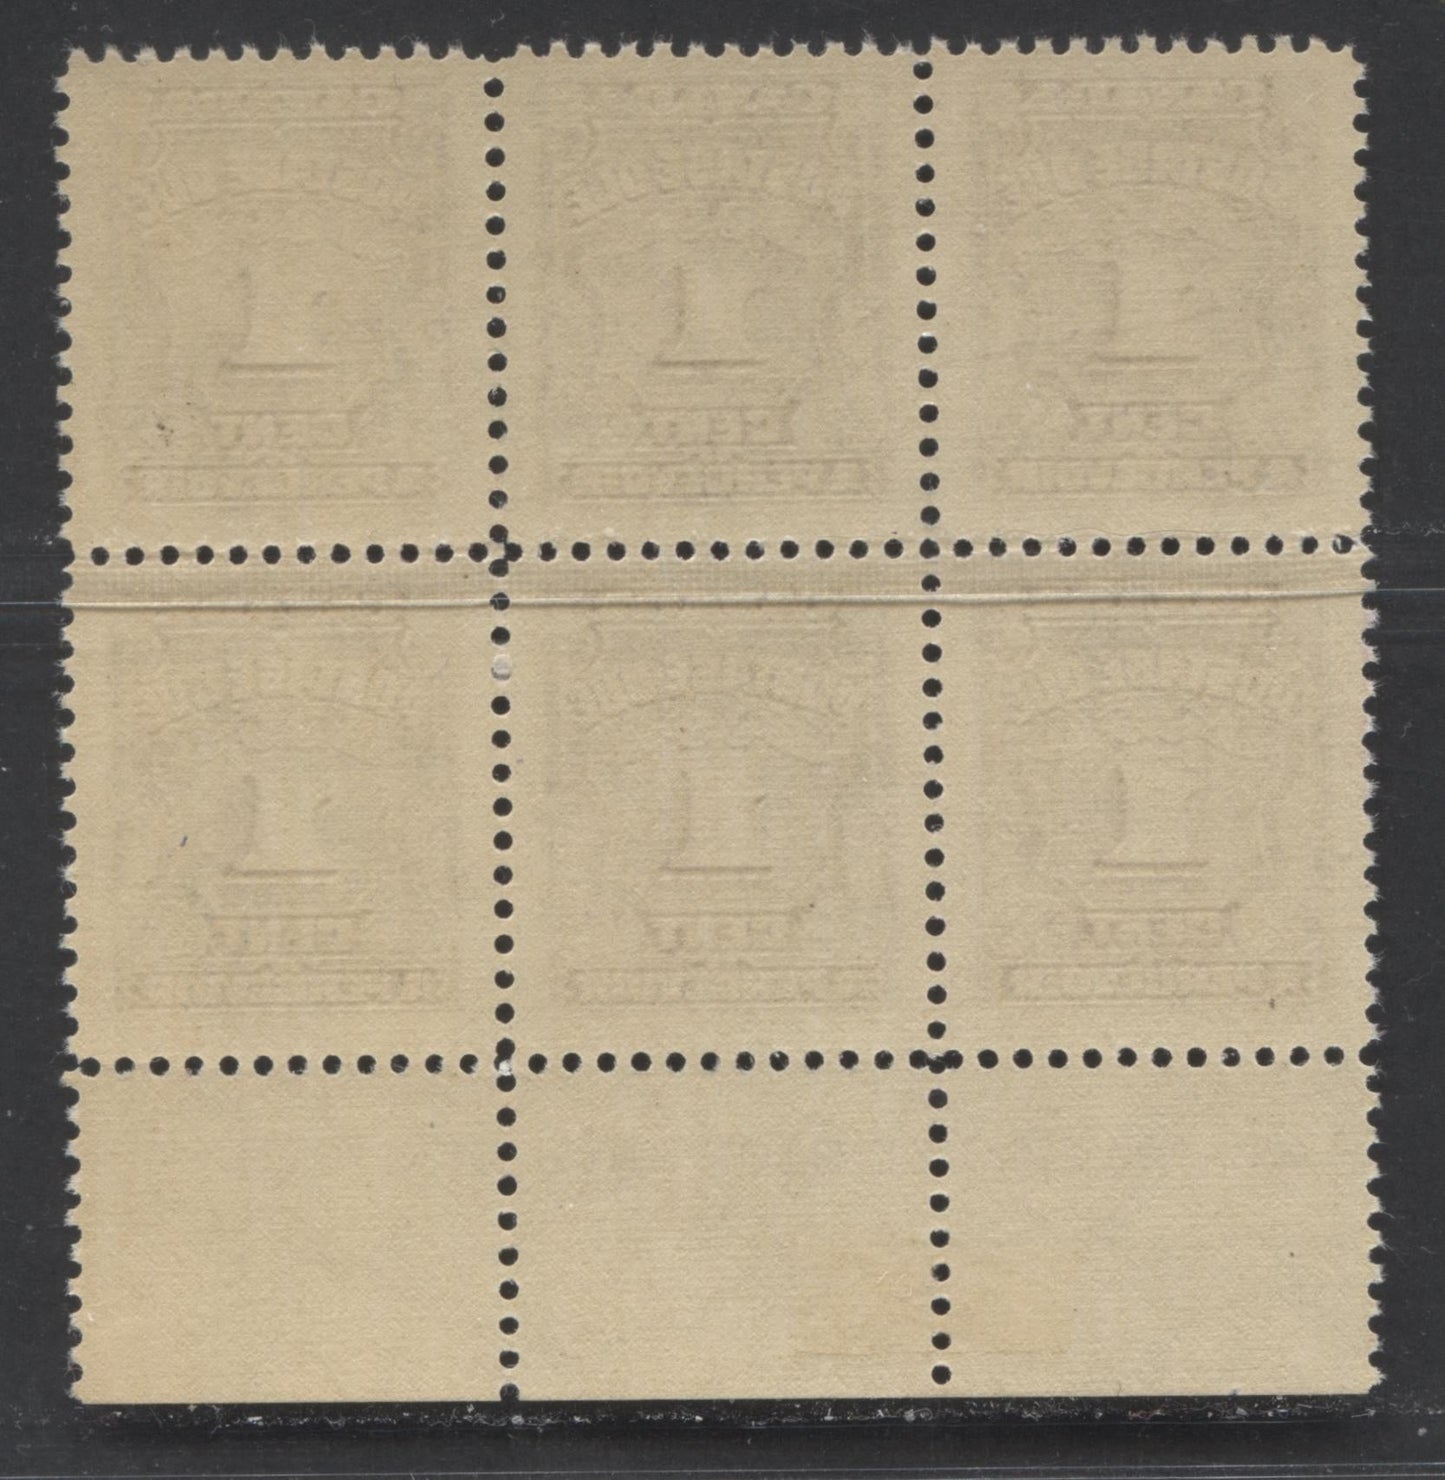 Lot 49 Canada #J15 1c Deep Reddish Lilac, 1935-1965 Fourth Postage Due Issue, A VFNH Lower Plate 1 Block Of 6 On Horizontal Ribbed Paper With Yellowish Cream Gum, Likely From 1935-1942